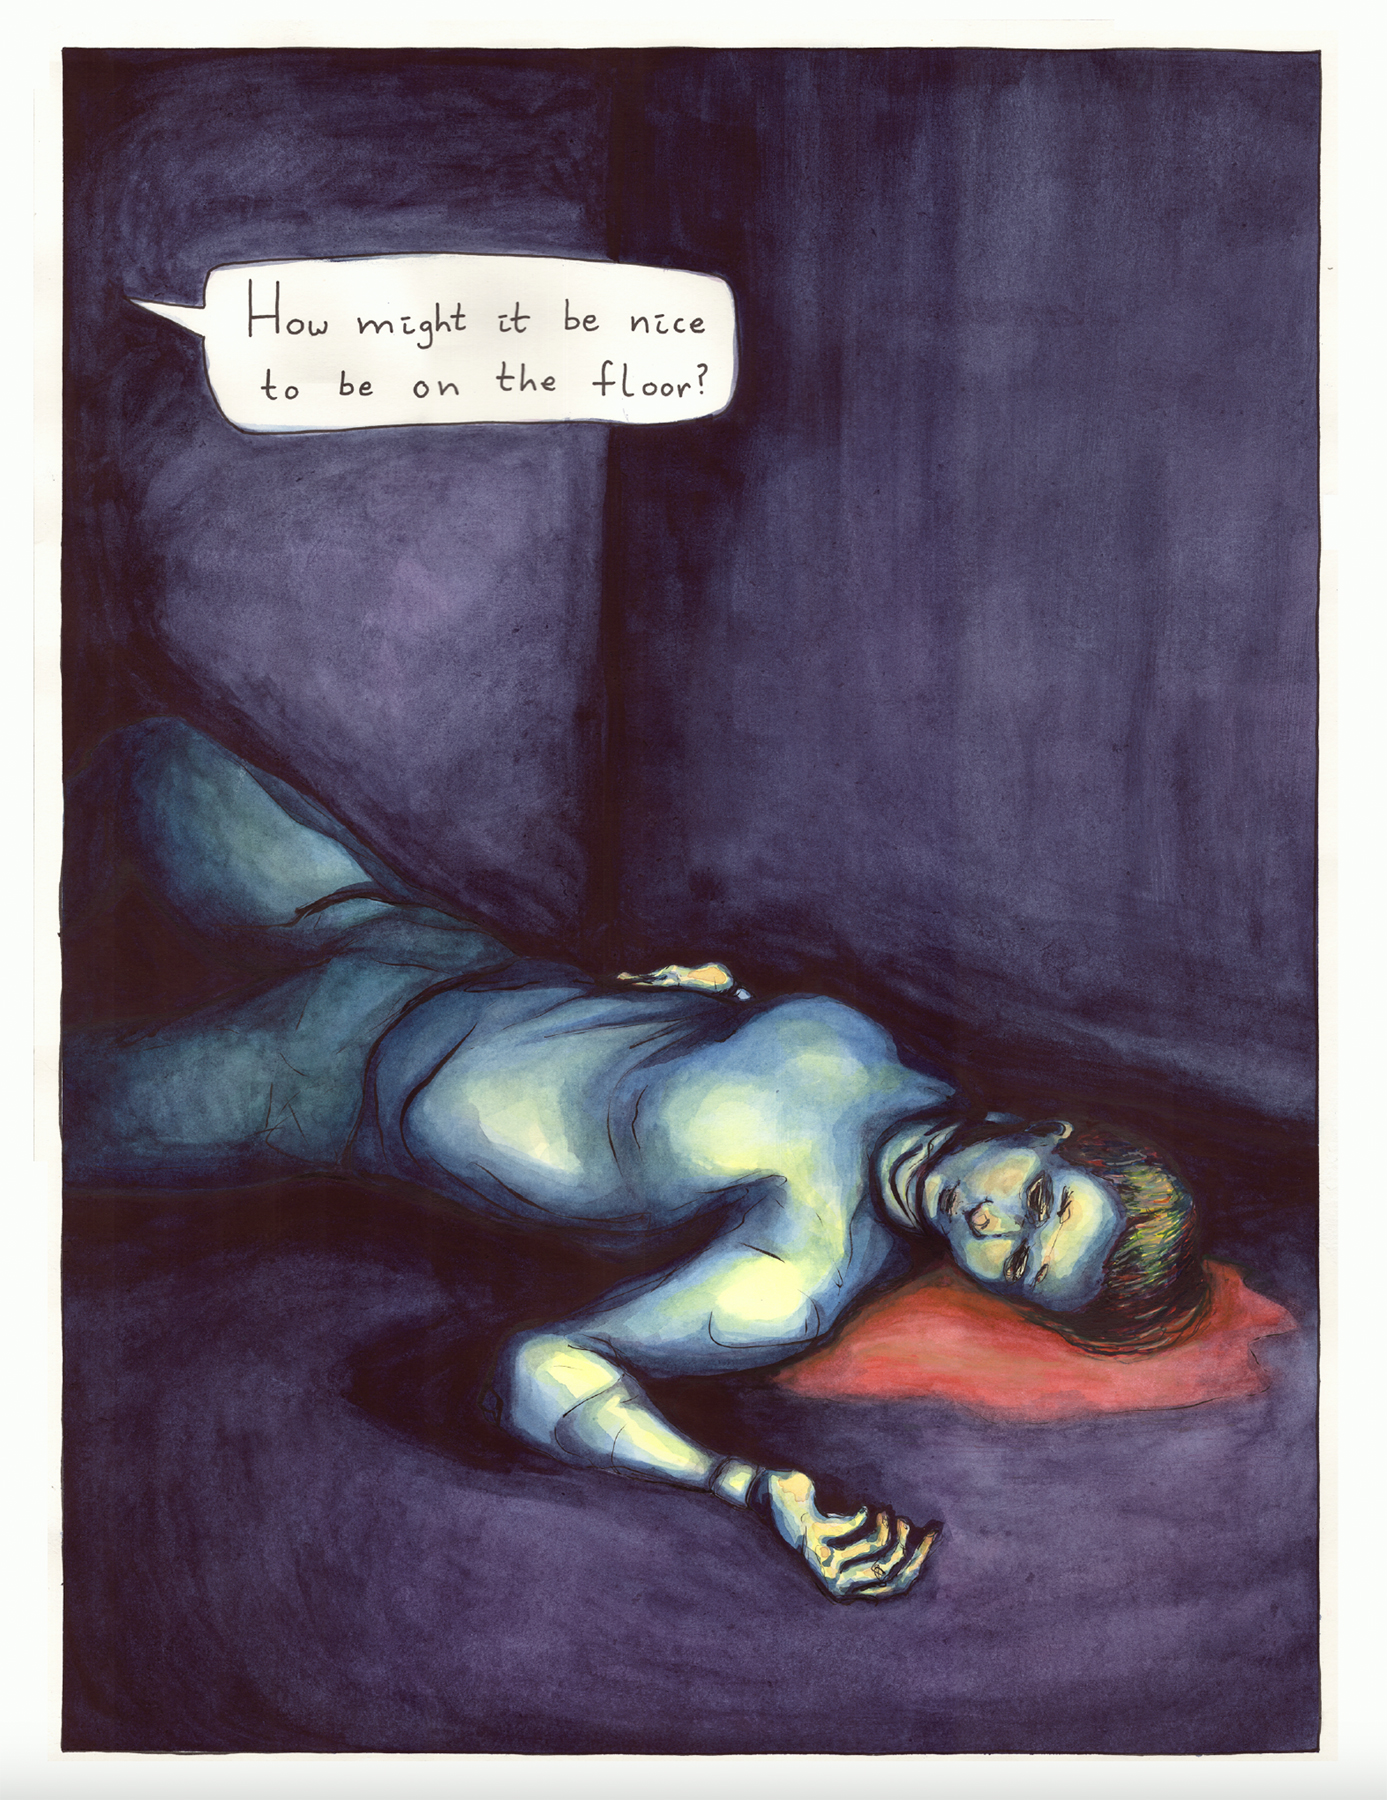 comic page from Against the Floor. Crane is lying on the floor in a dark room. Image courtesy of Daniell Stromanthe